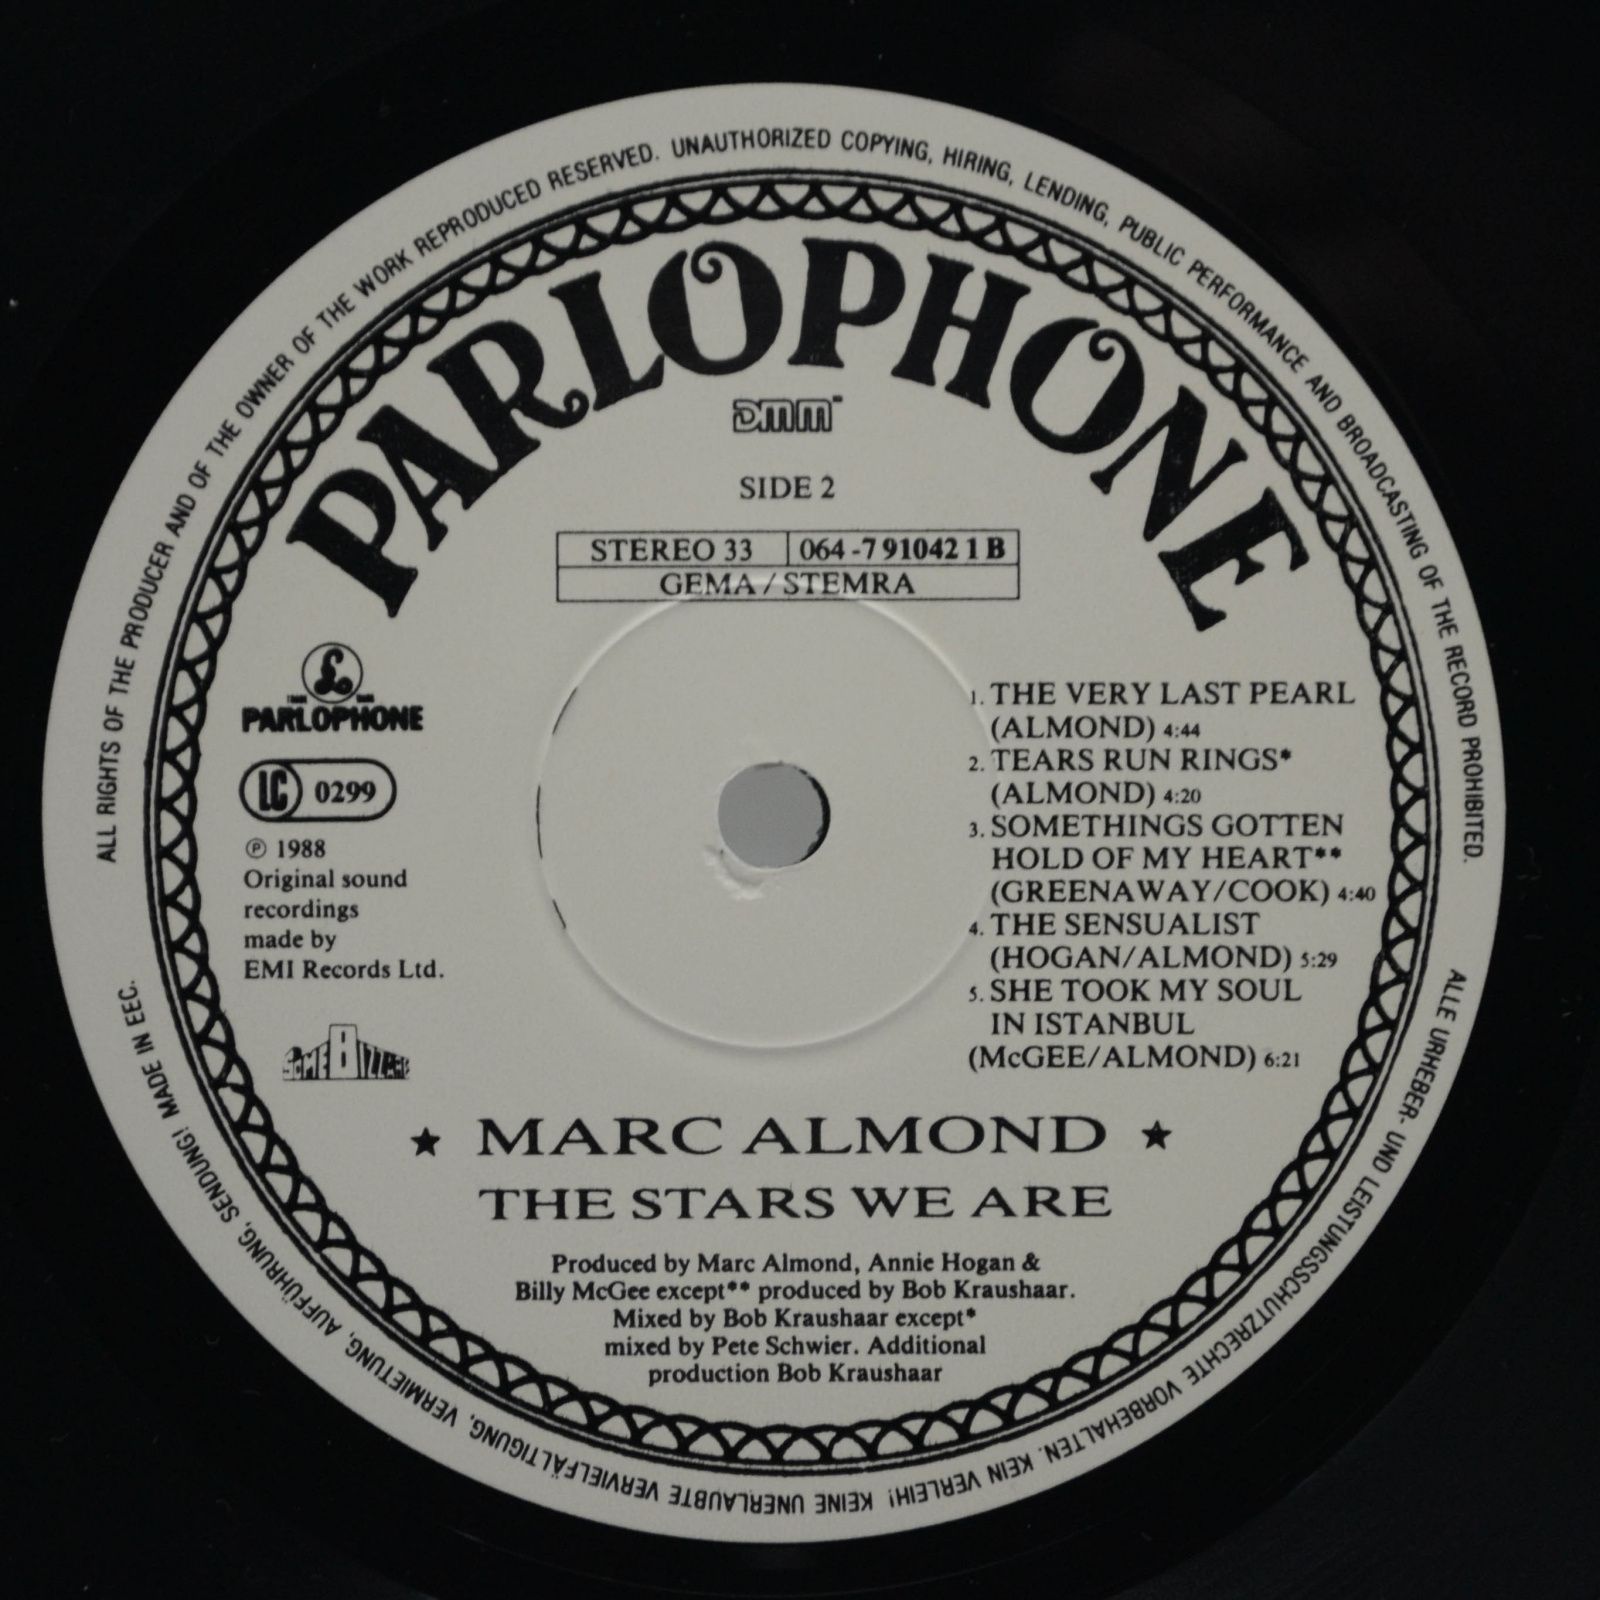 Marc Almond — The Stars We Are, 1988